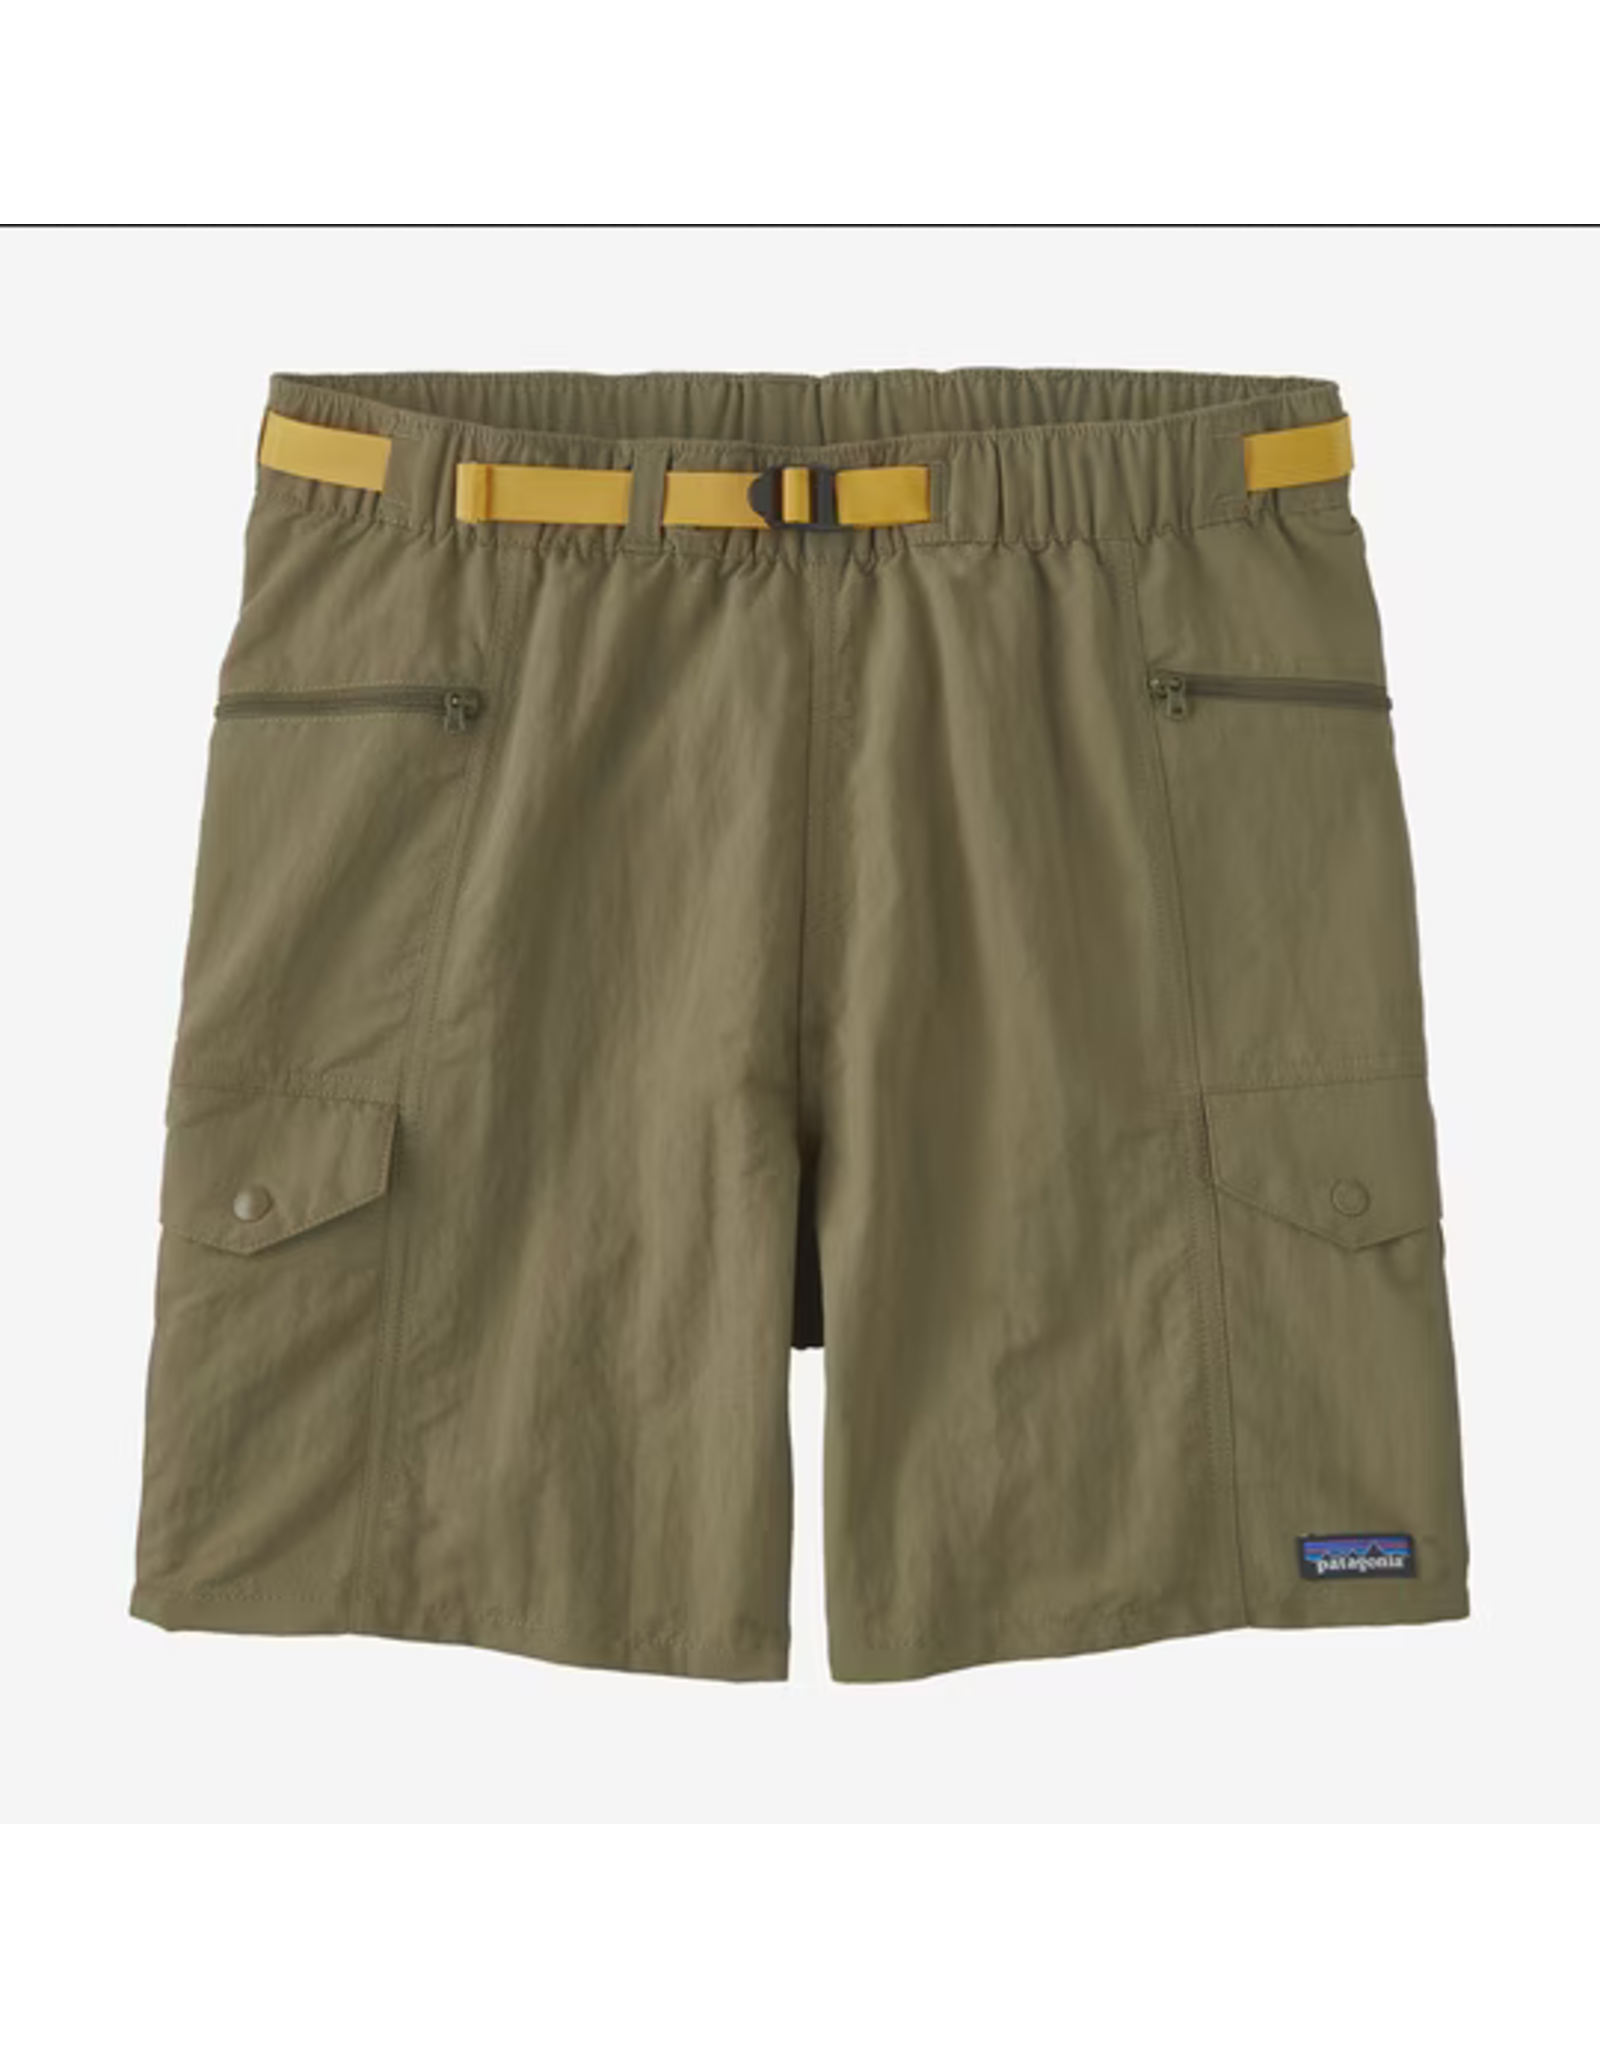 PATAGONIA MENS OUTDOOR EVERYDAY SHORTS - 7 IN. 2023